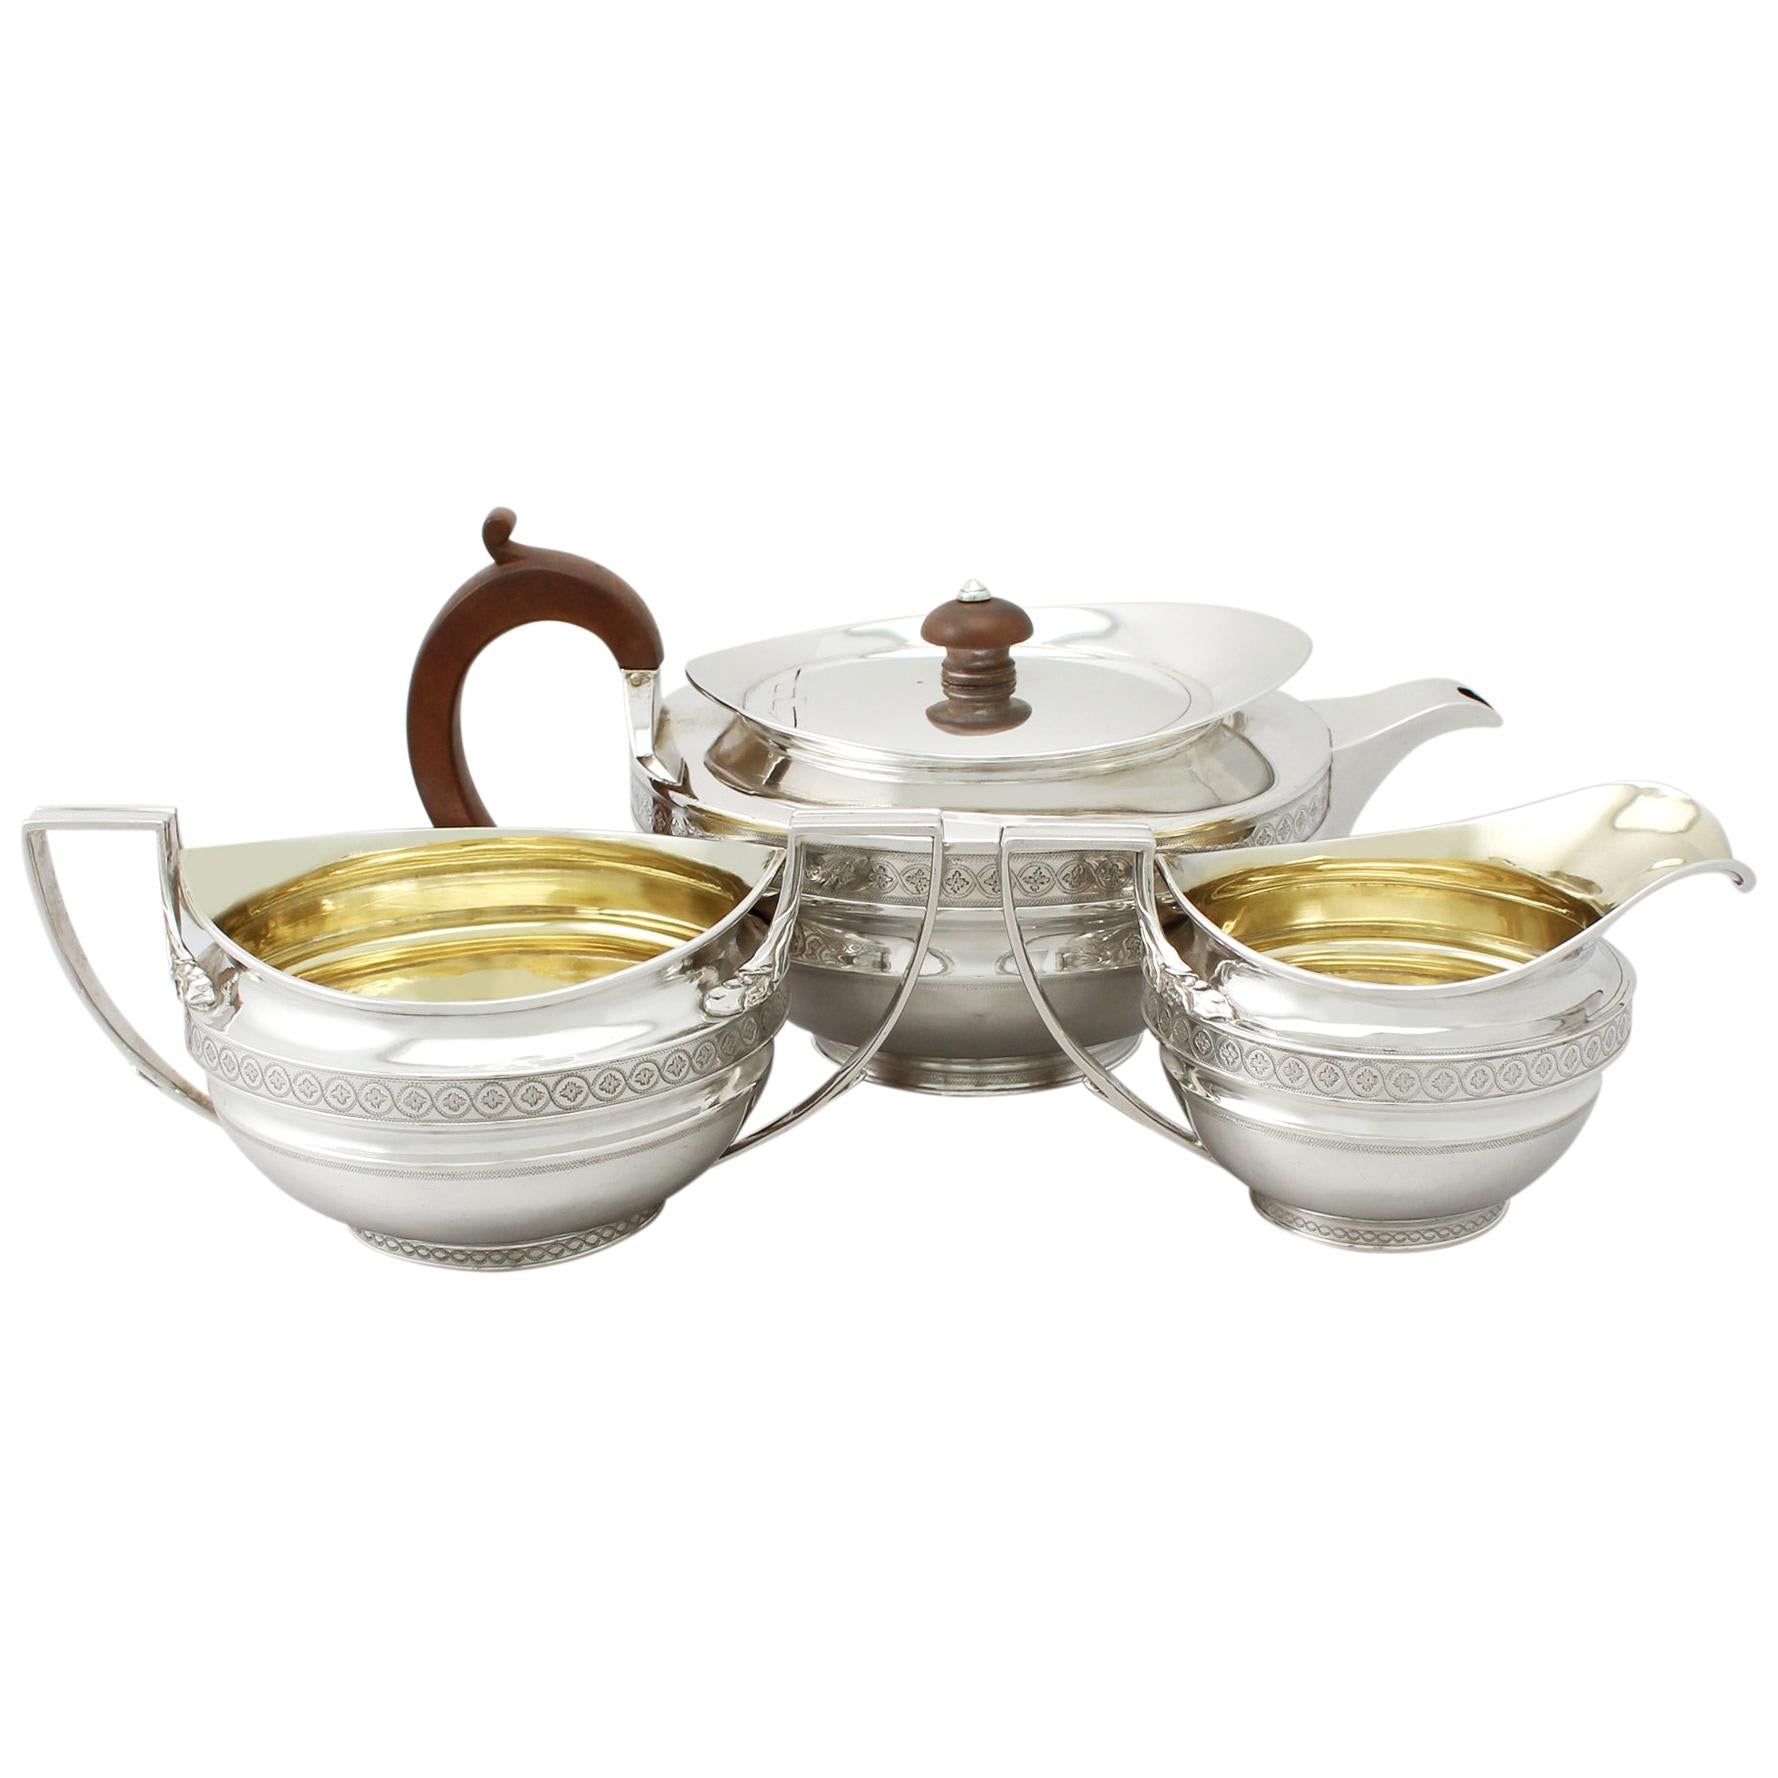 Antique George III Sterling Silver Three Piece Tea Service by John Emes